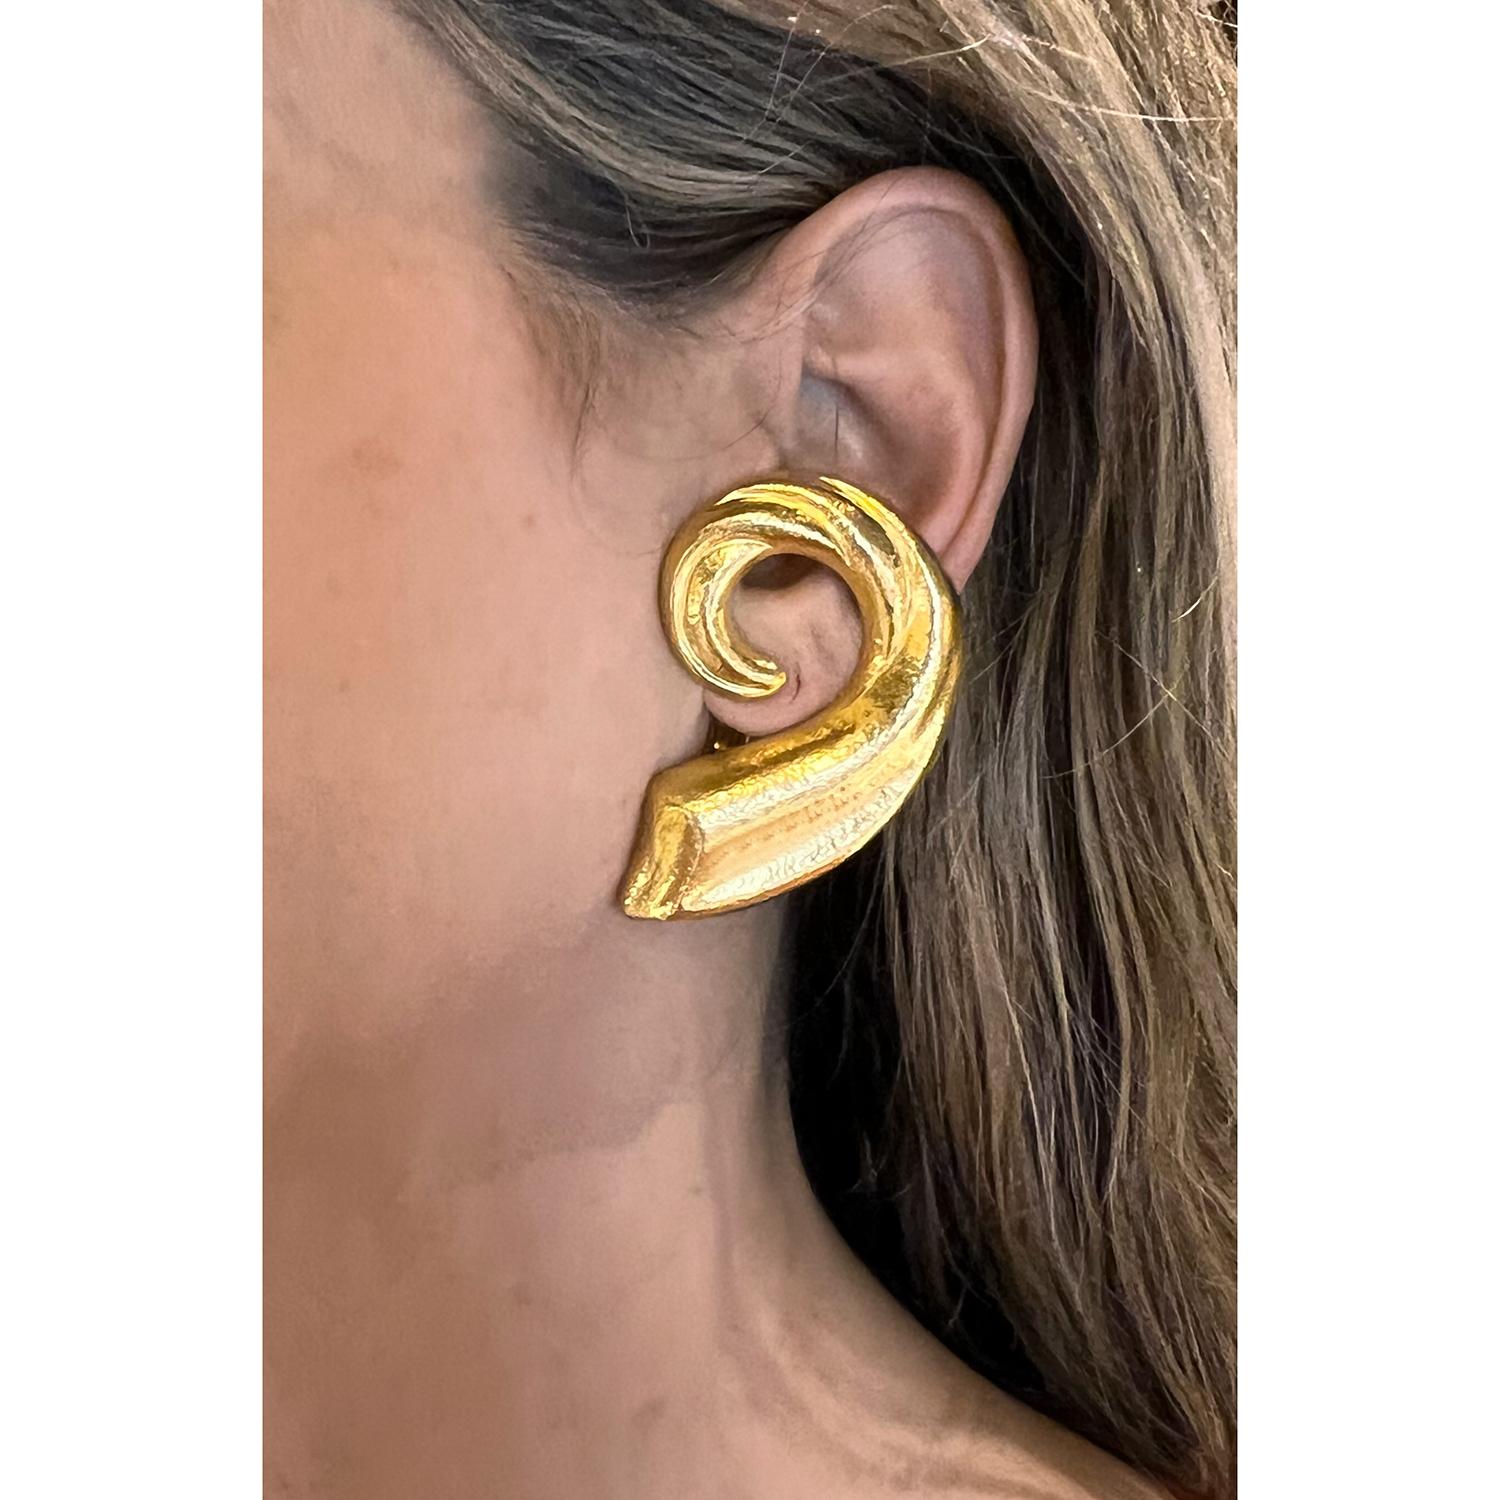 Part of his 1970s Minoans & Mycenaeans Collection, Ilias Lalaounis crafted these statement earrings using ancient Greek artistic patterns in hammered, textured and polished 18k yellow gold. Measuring over 2